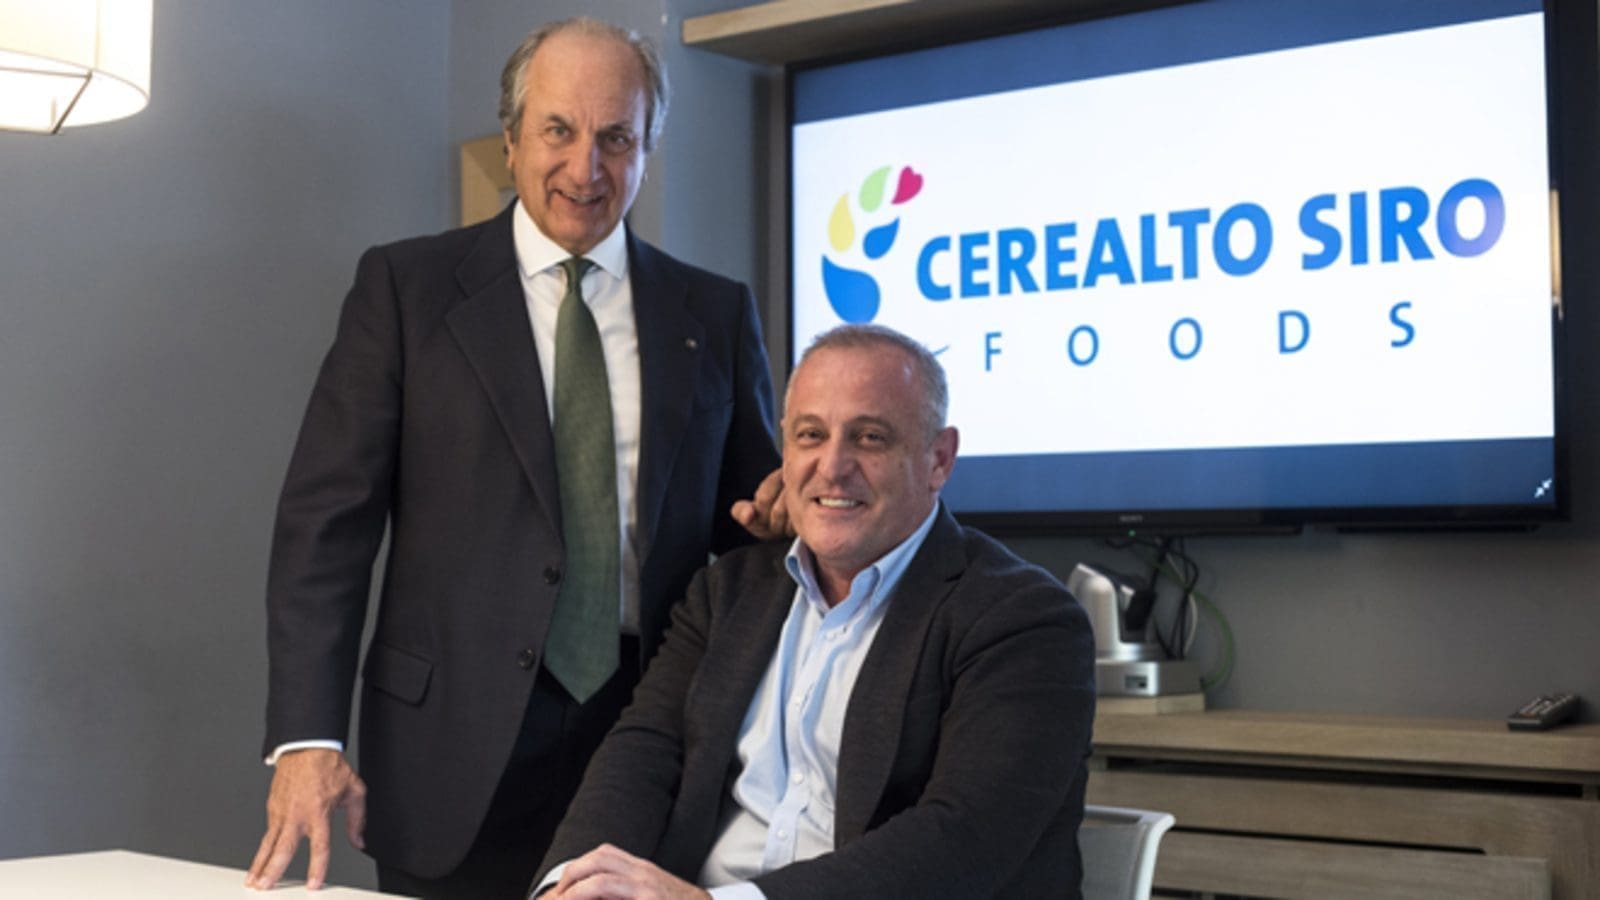 Cerealto Siro Foods averts bankruptcy with US$104.3M cash injection